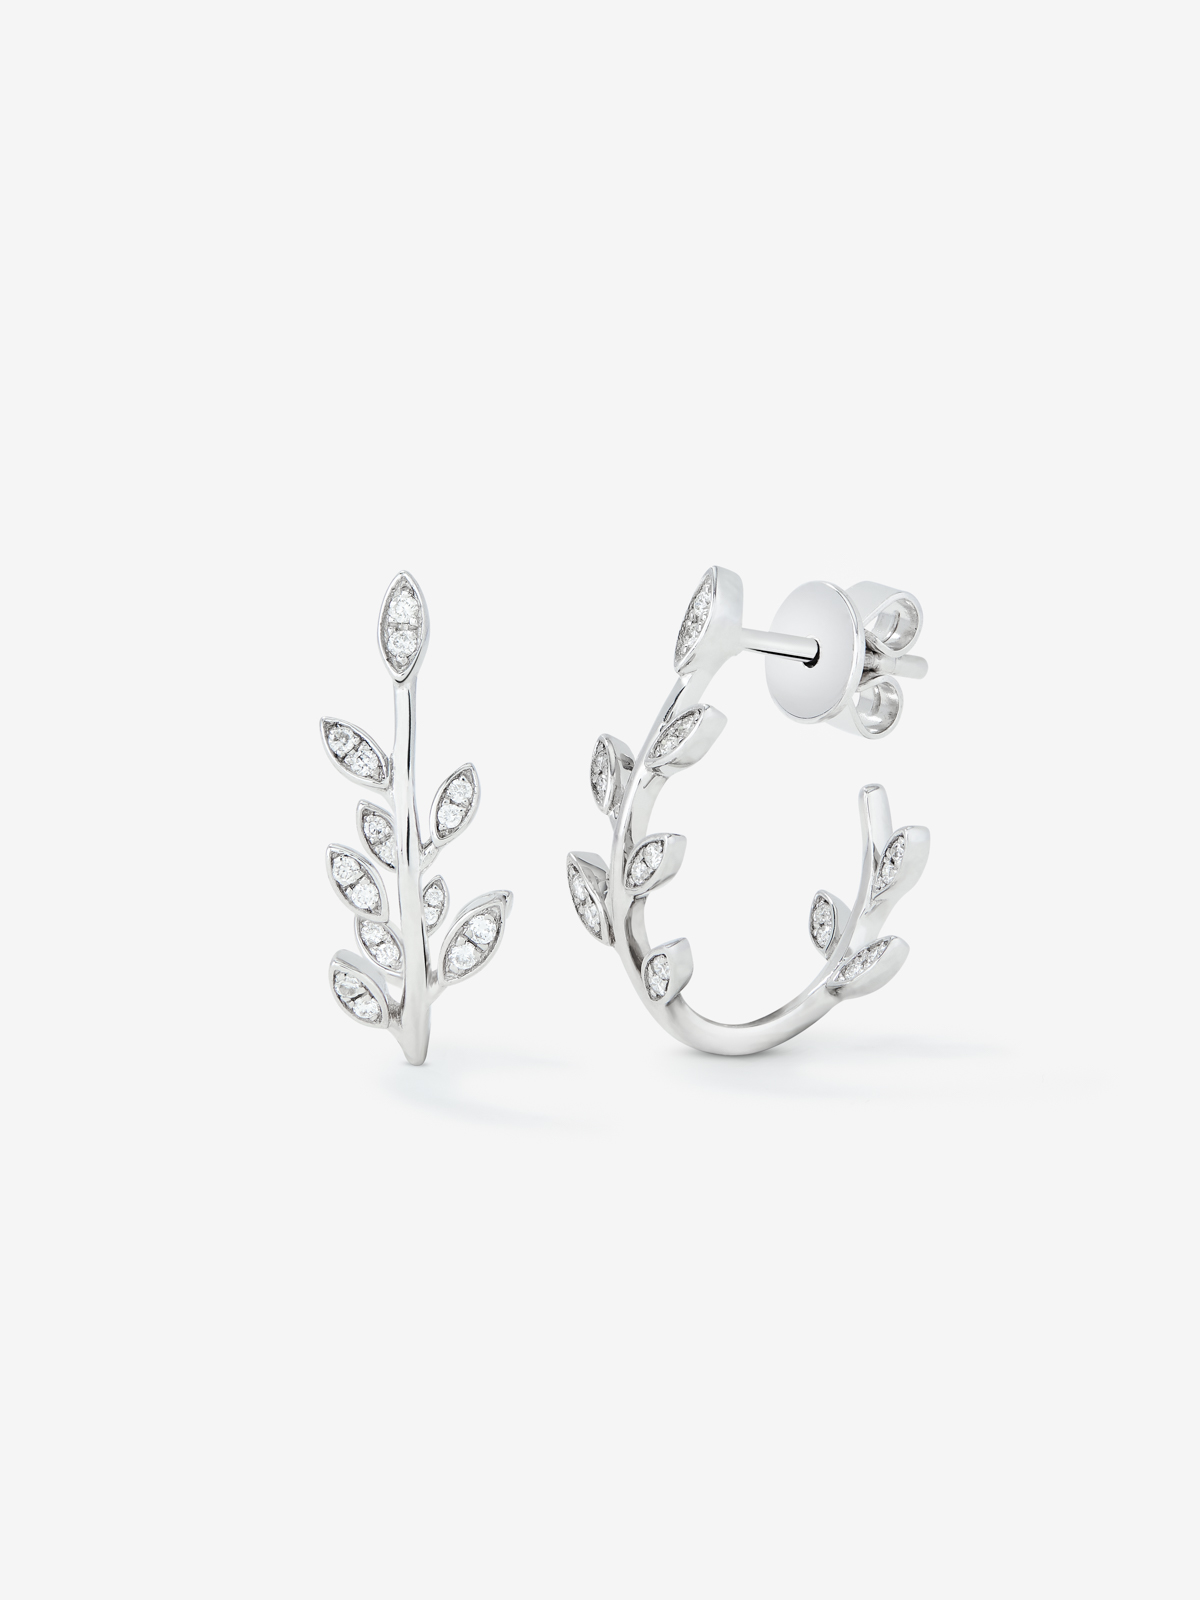 18K white gold hoop earrings with pave diamond